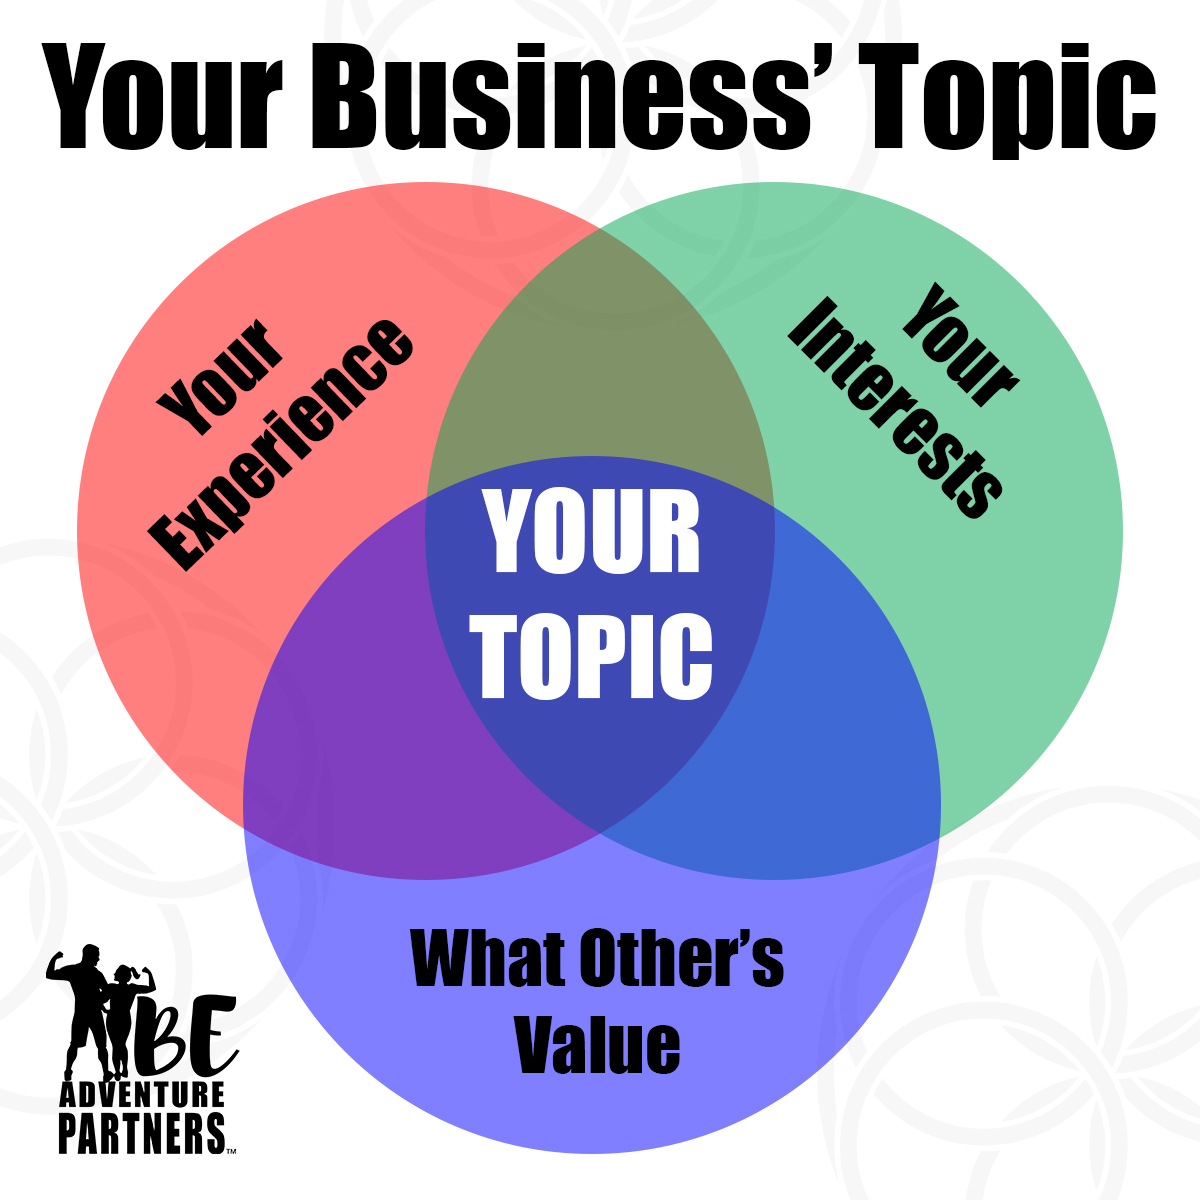 Your Business Topic